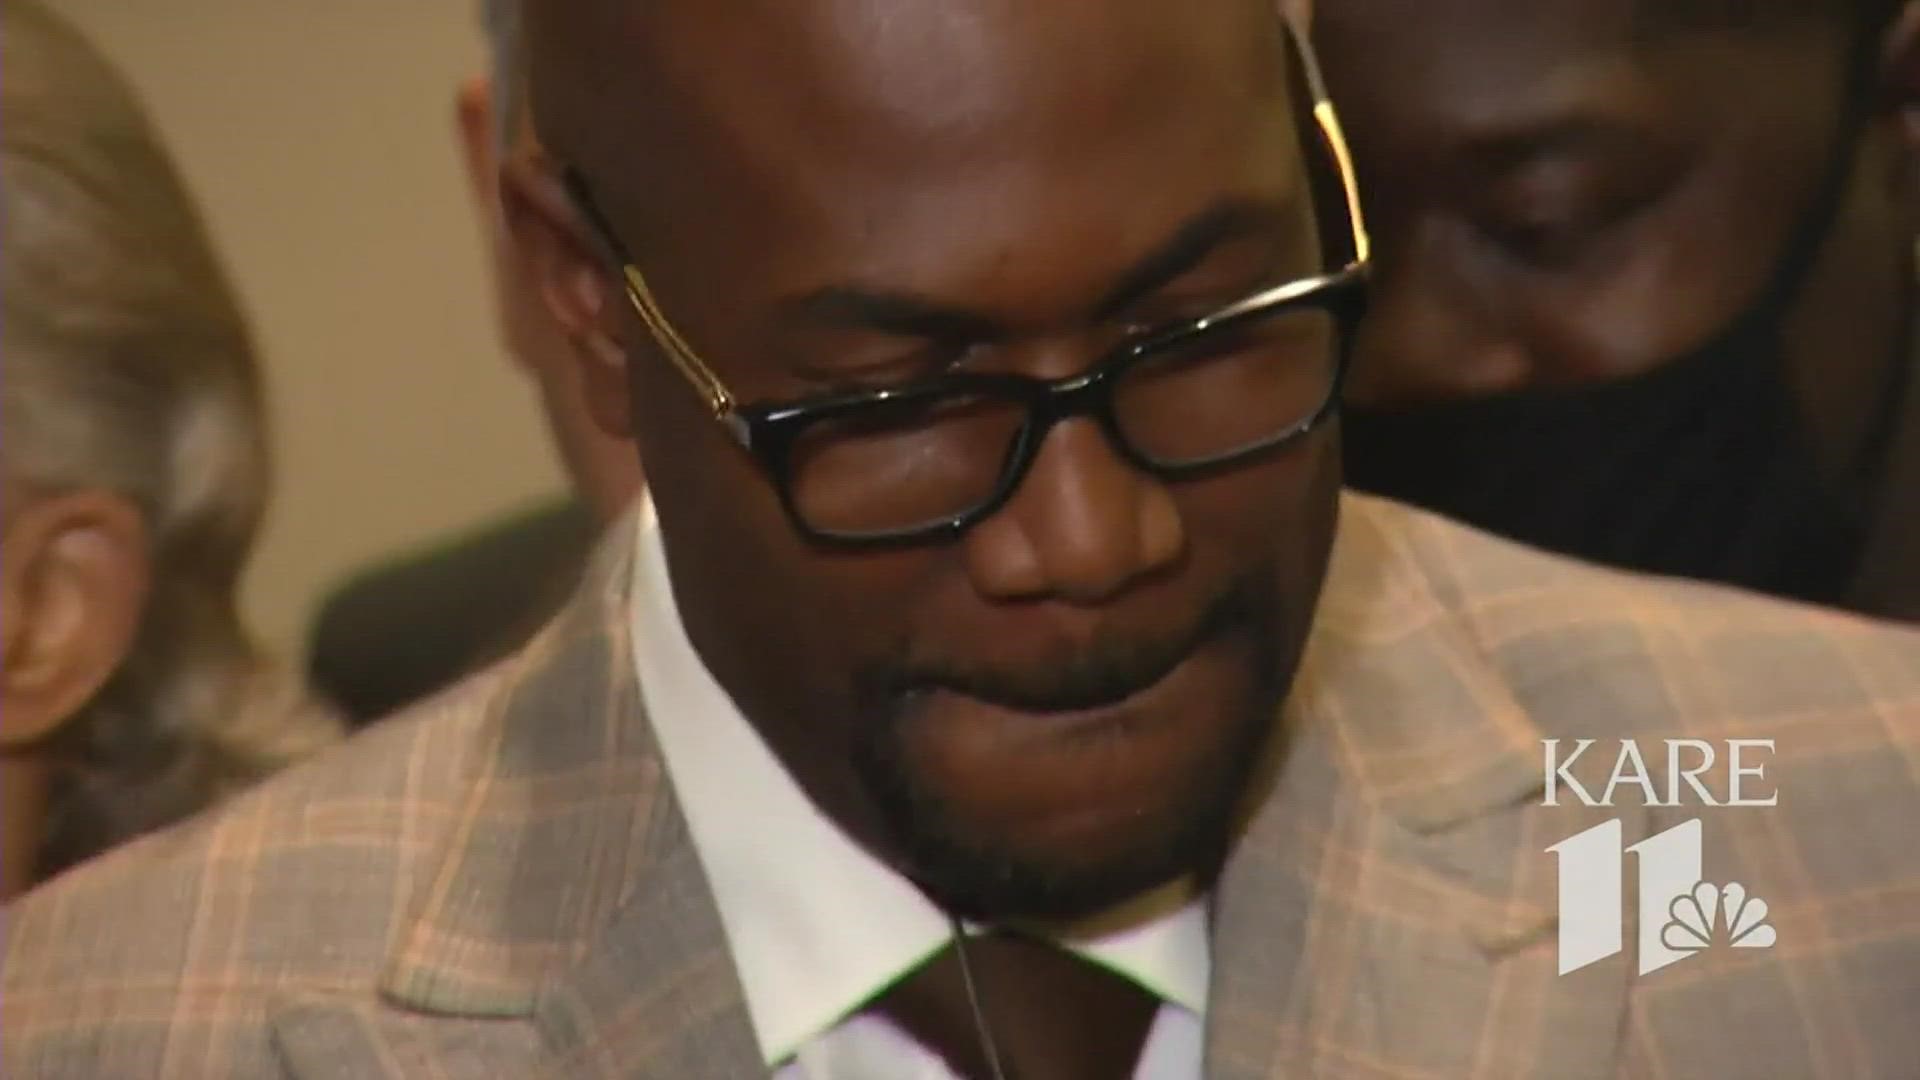 Floyd's family said they're celebrating the jury's decision, but added that further systemic justice is needed.